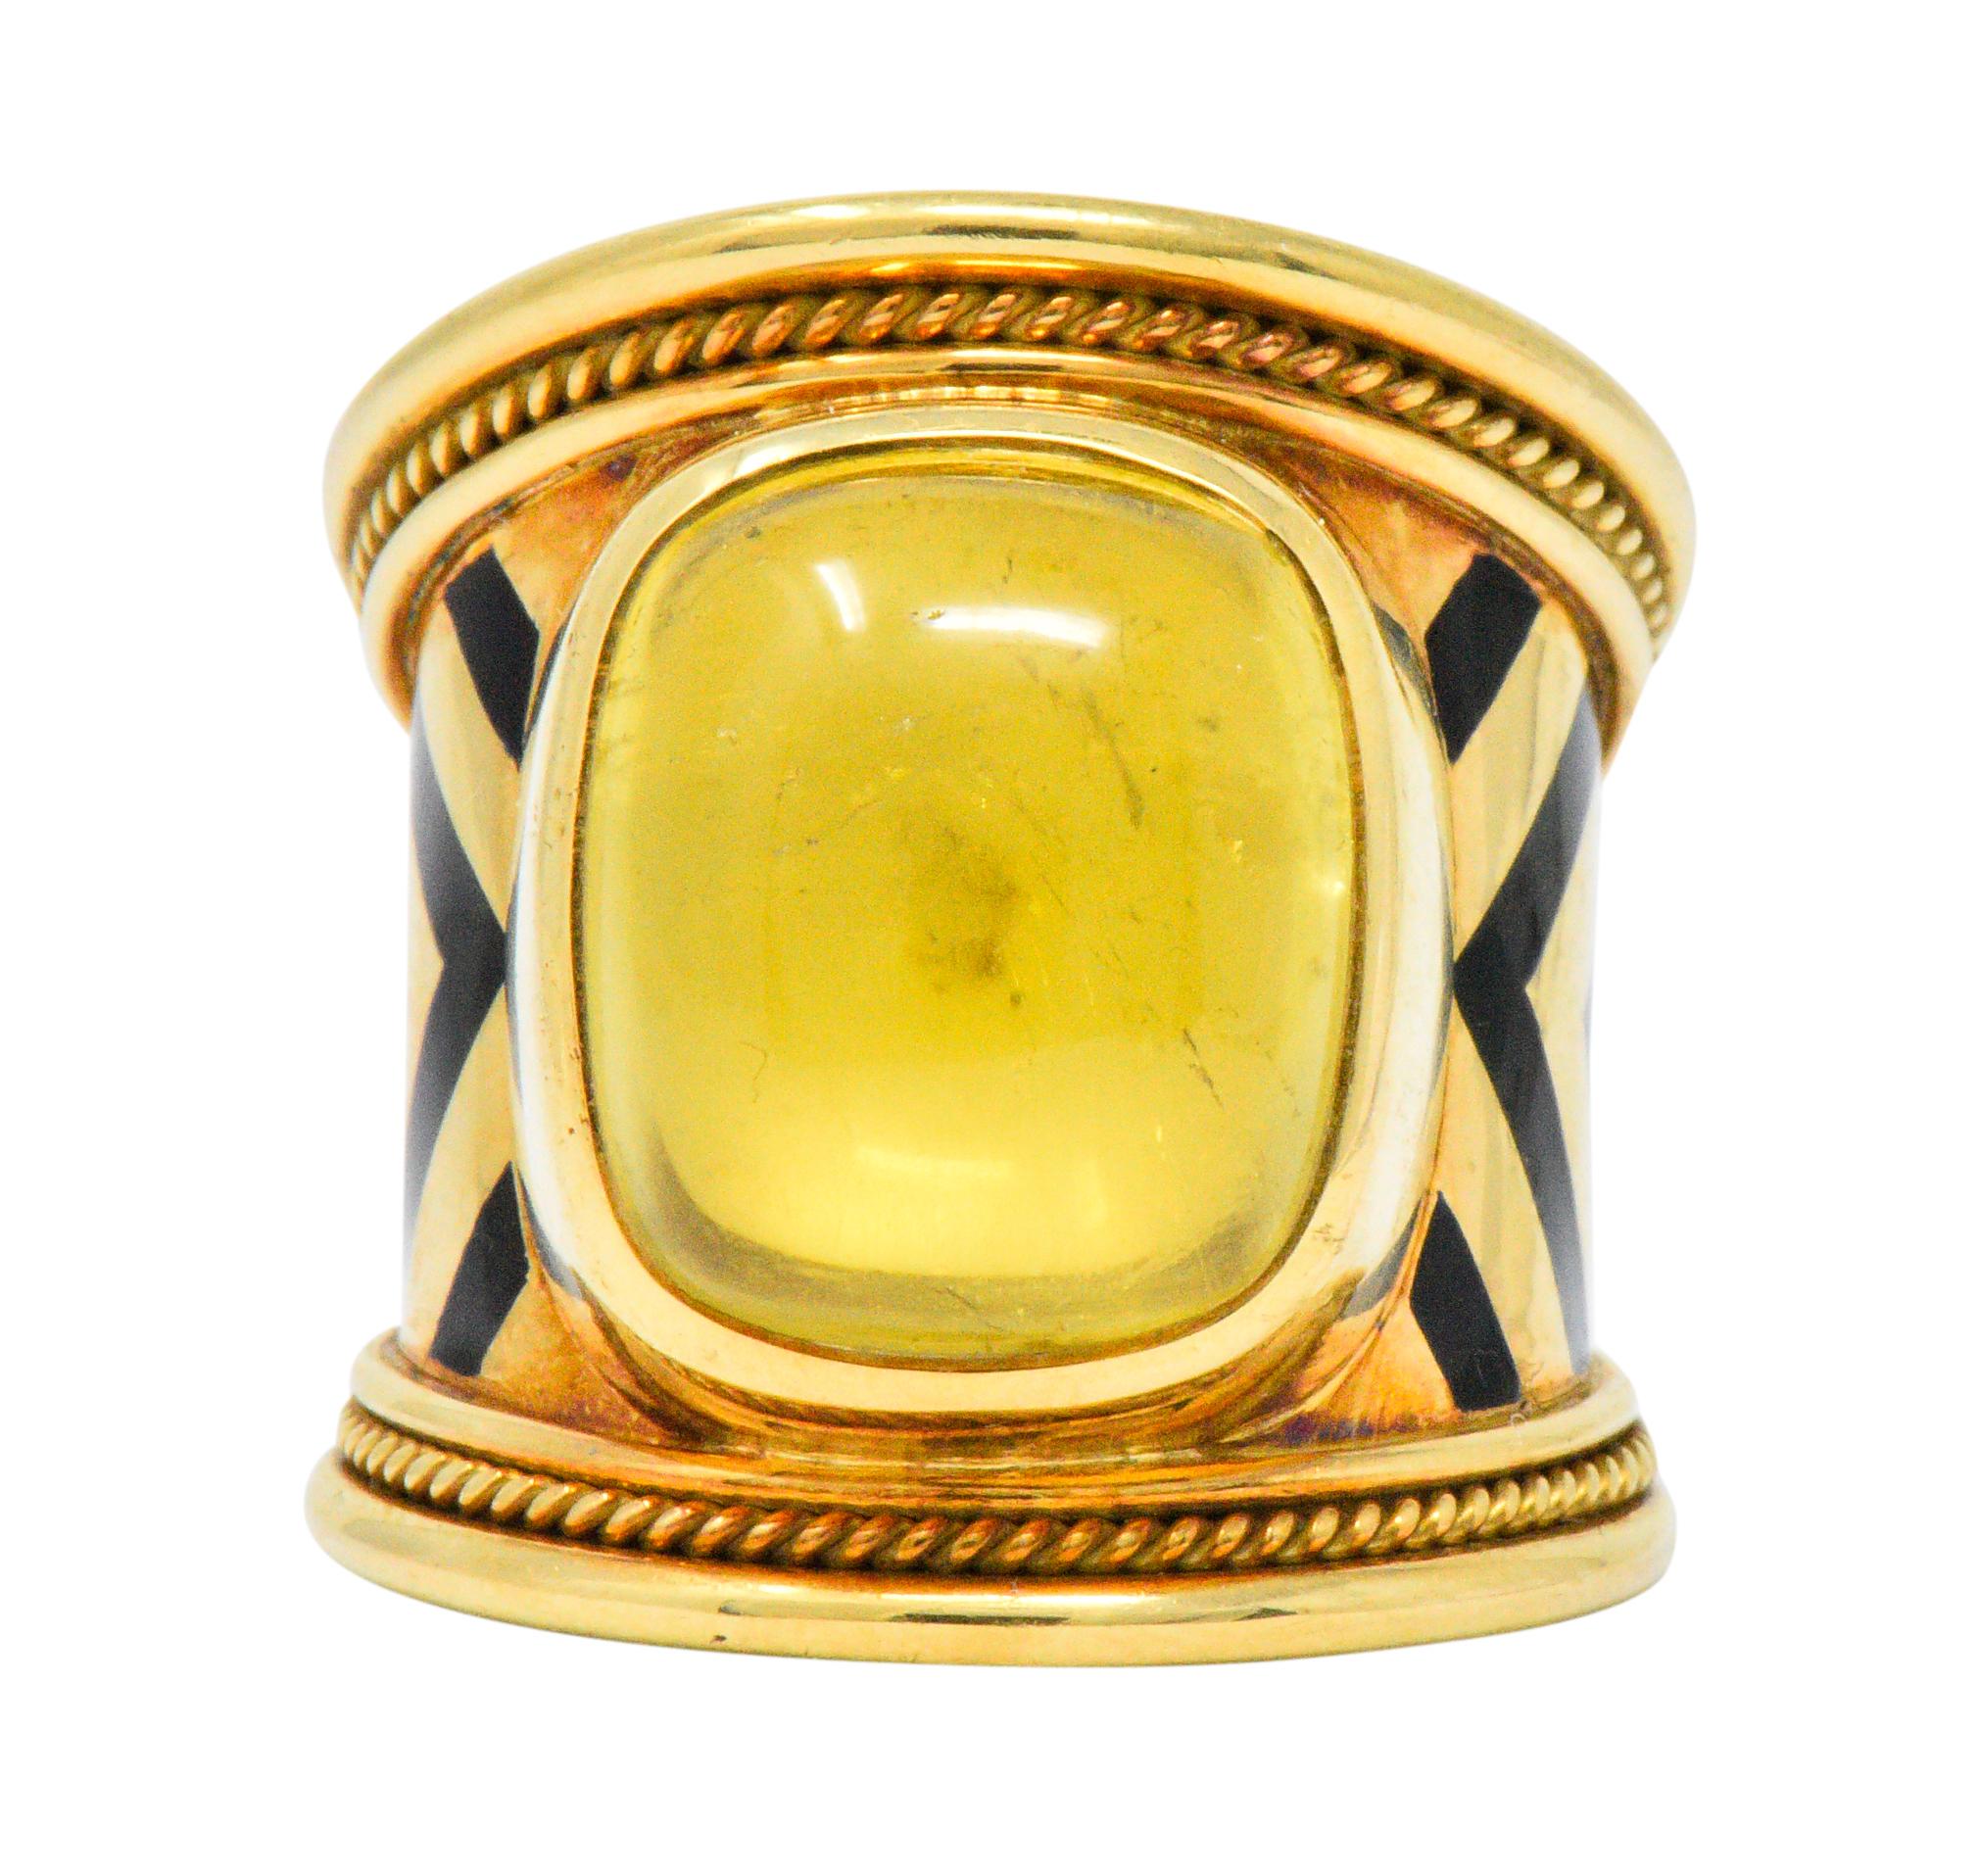 Centering a bezel set, rectangular buff-top citrine, backed with mother of pearl, measuring approximately 14.5 x 12.5 mm, bright sunny yellow

Black enamel chevron inlay with twisted gold detail

Signed Gage with maker's mark for Elizabeth Gage and